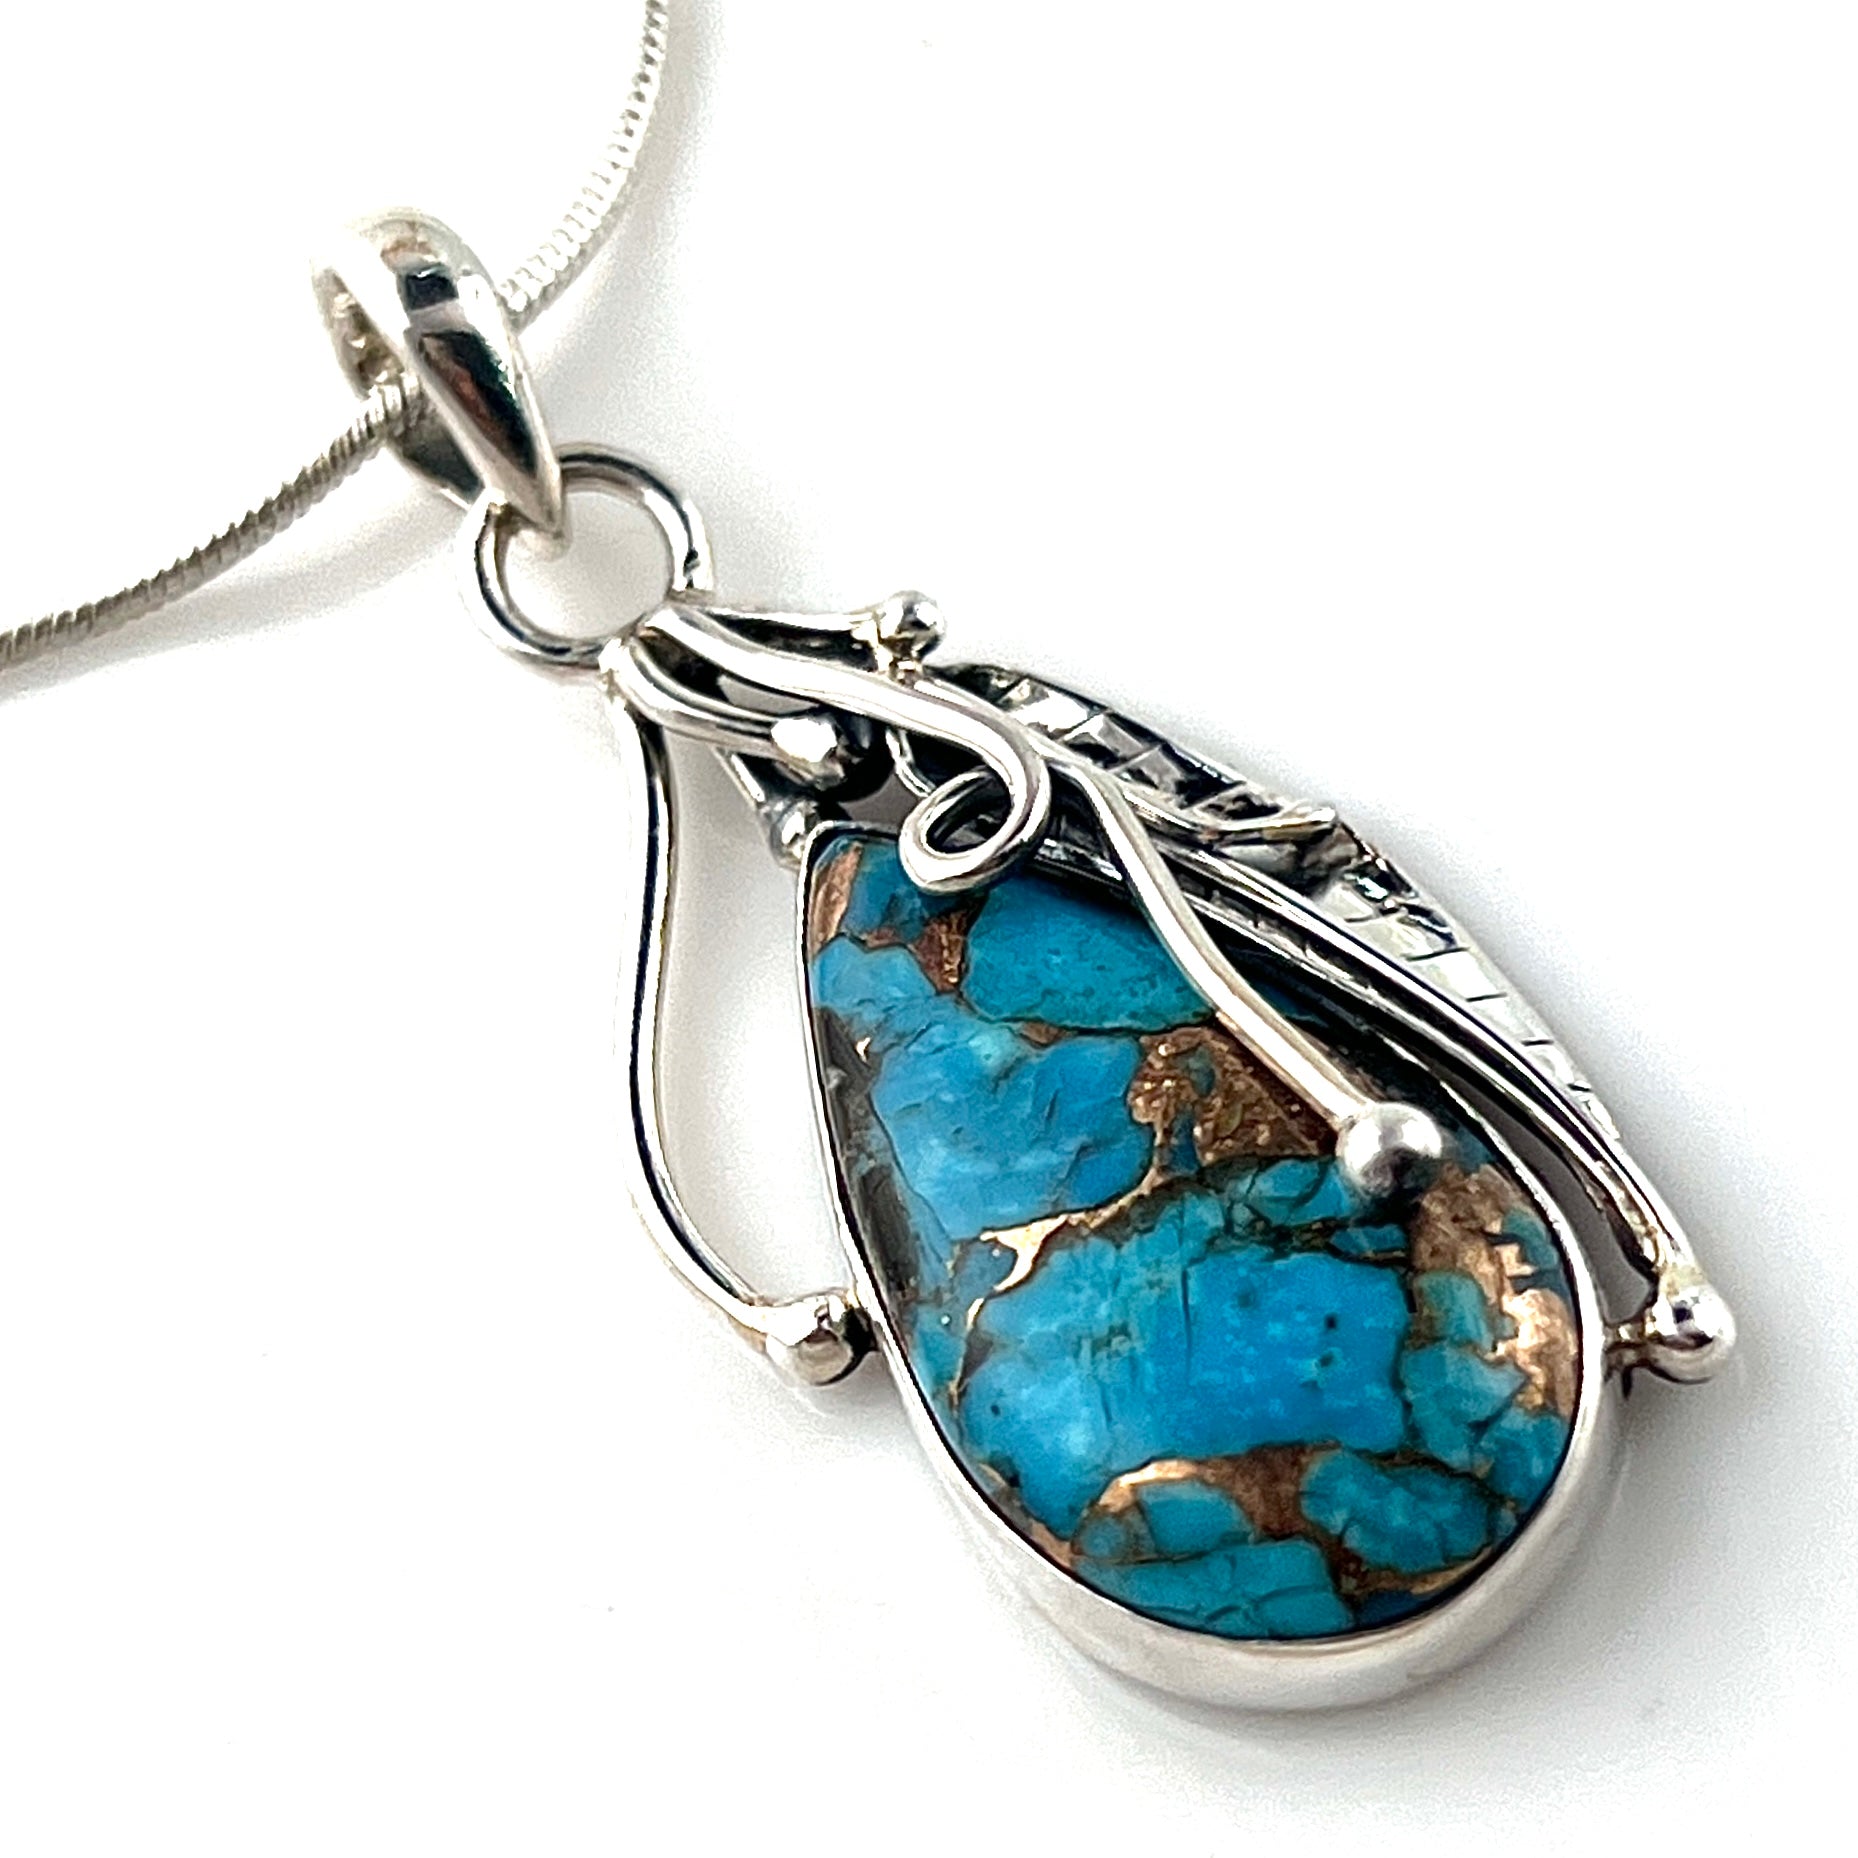 Blue Copper Turquoise Sterling Silver Vine Pendant - Keja Designs Jewelry